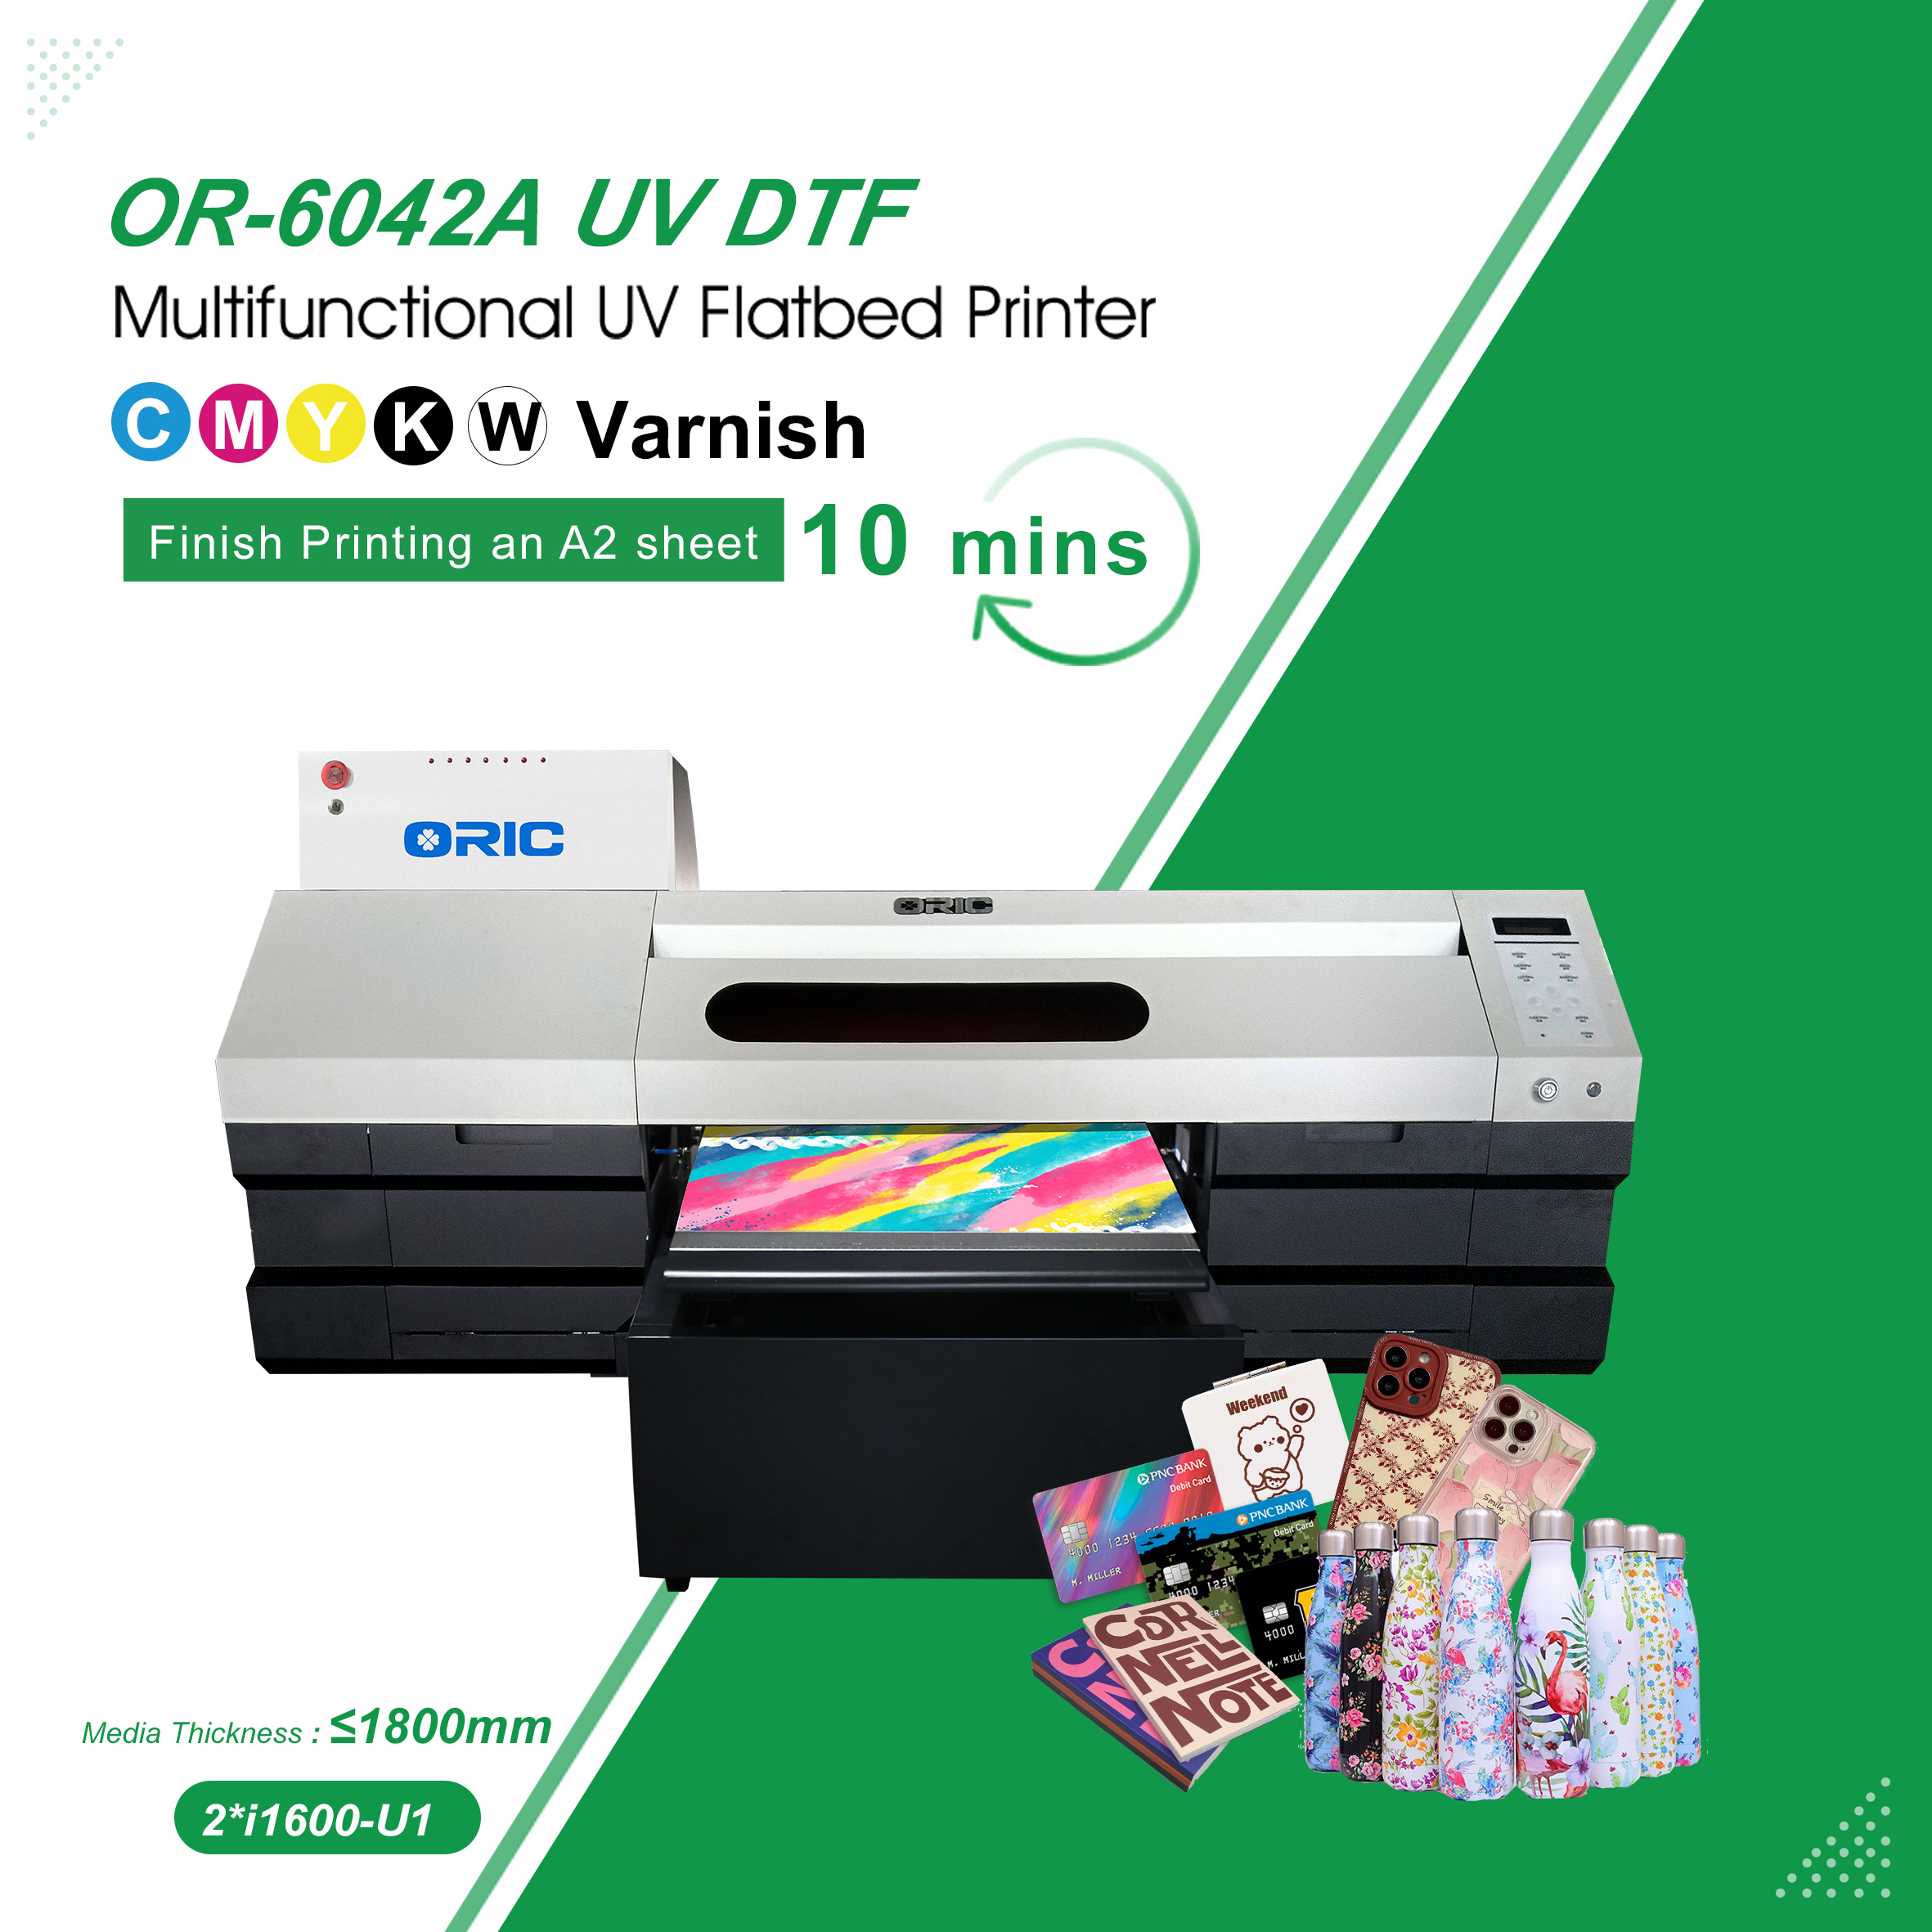 UVDTF Premium Film (for flatbed printers) : Print with UV ink to